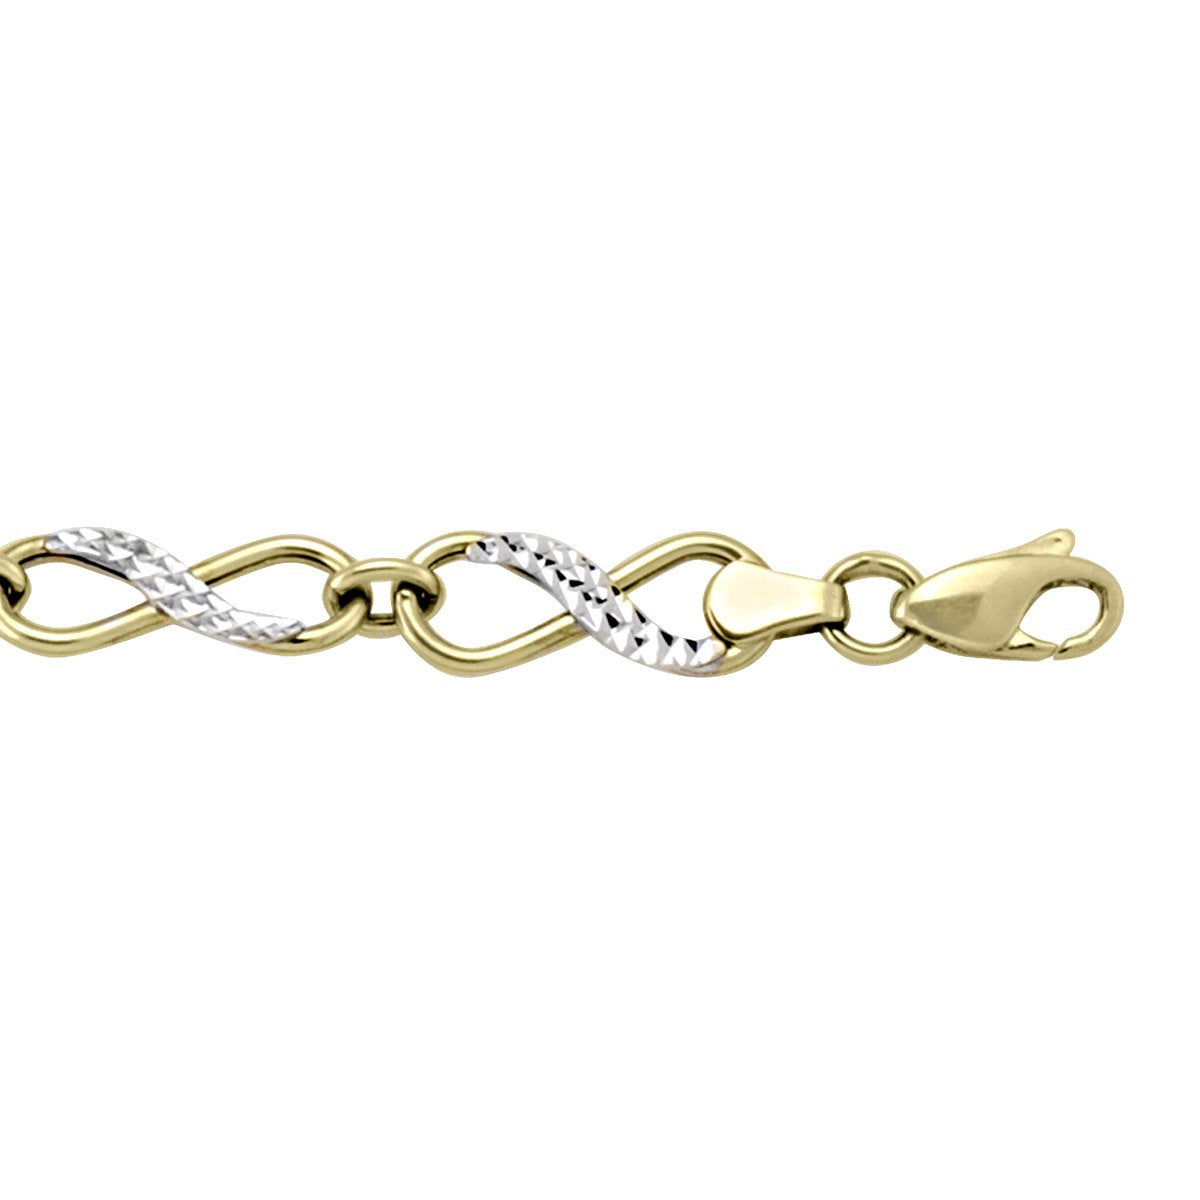 BRACELETS TWO TONE GOLD INFINITY HOLLOW LINK 